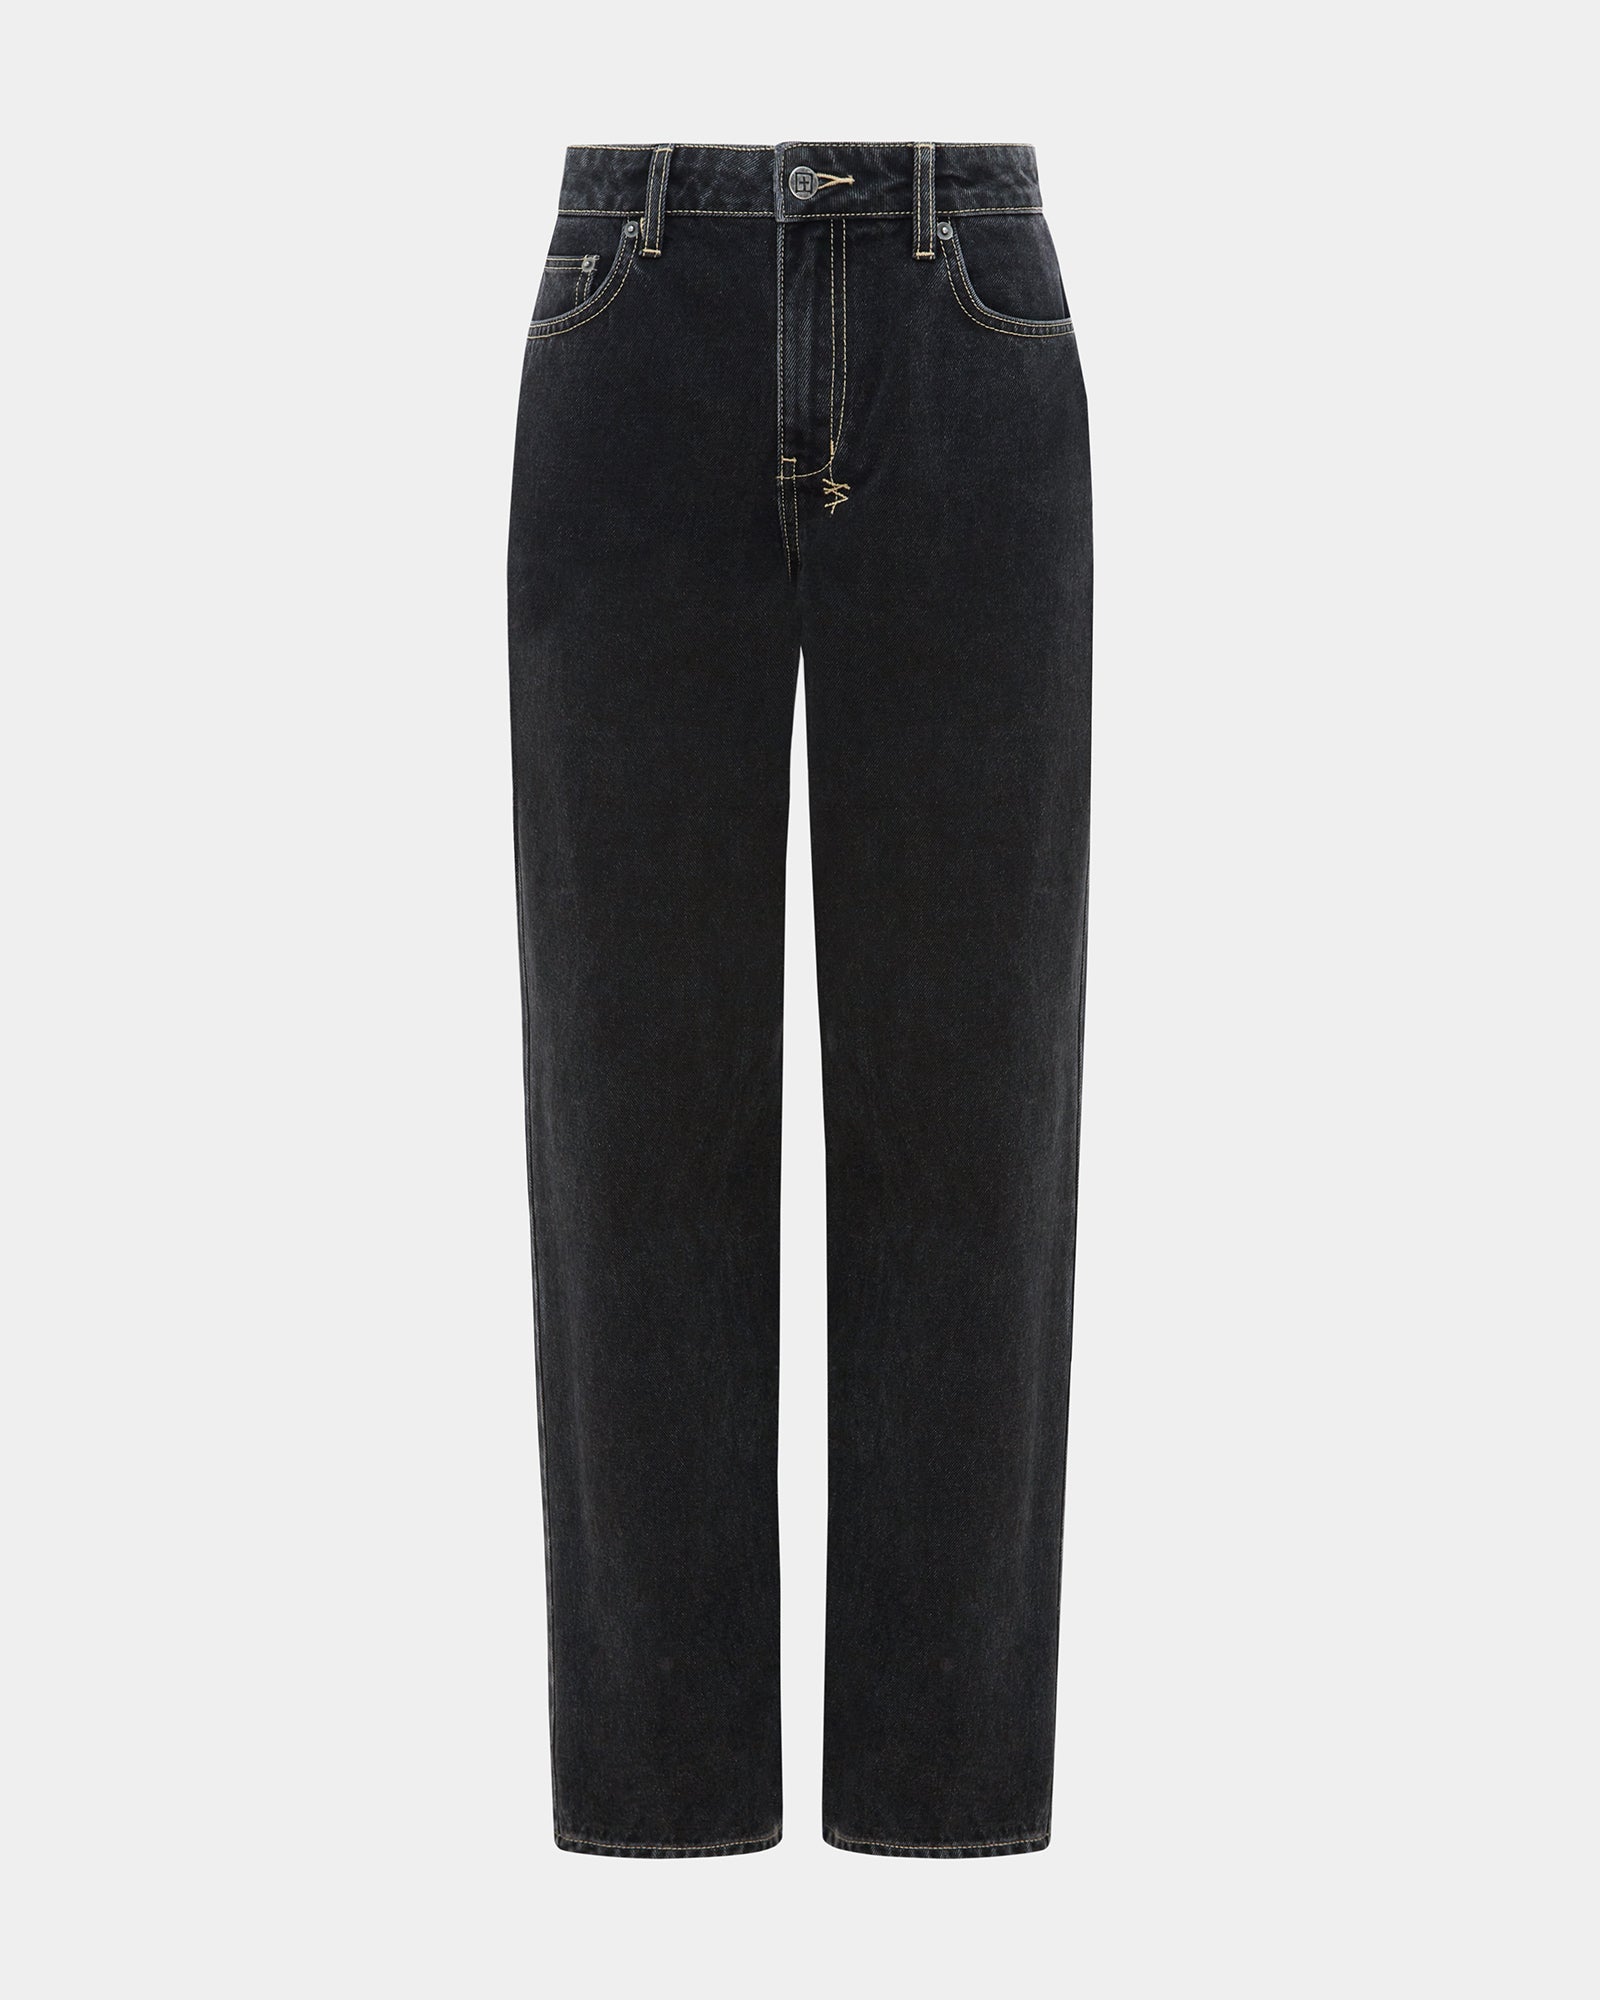 Low Rider Ghosted Low Rise Jeans - Faded Black Denim | Ksubi